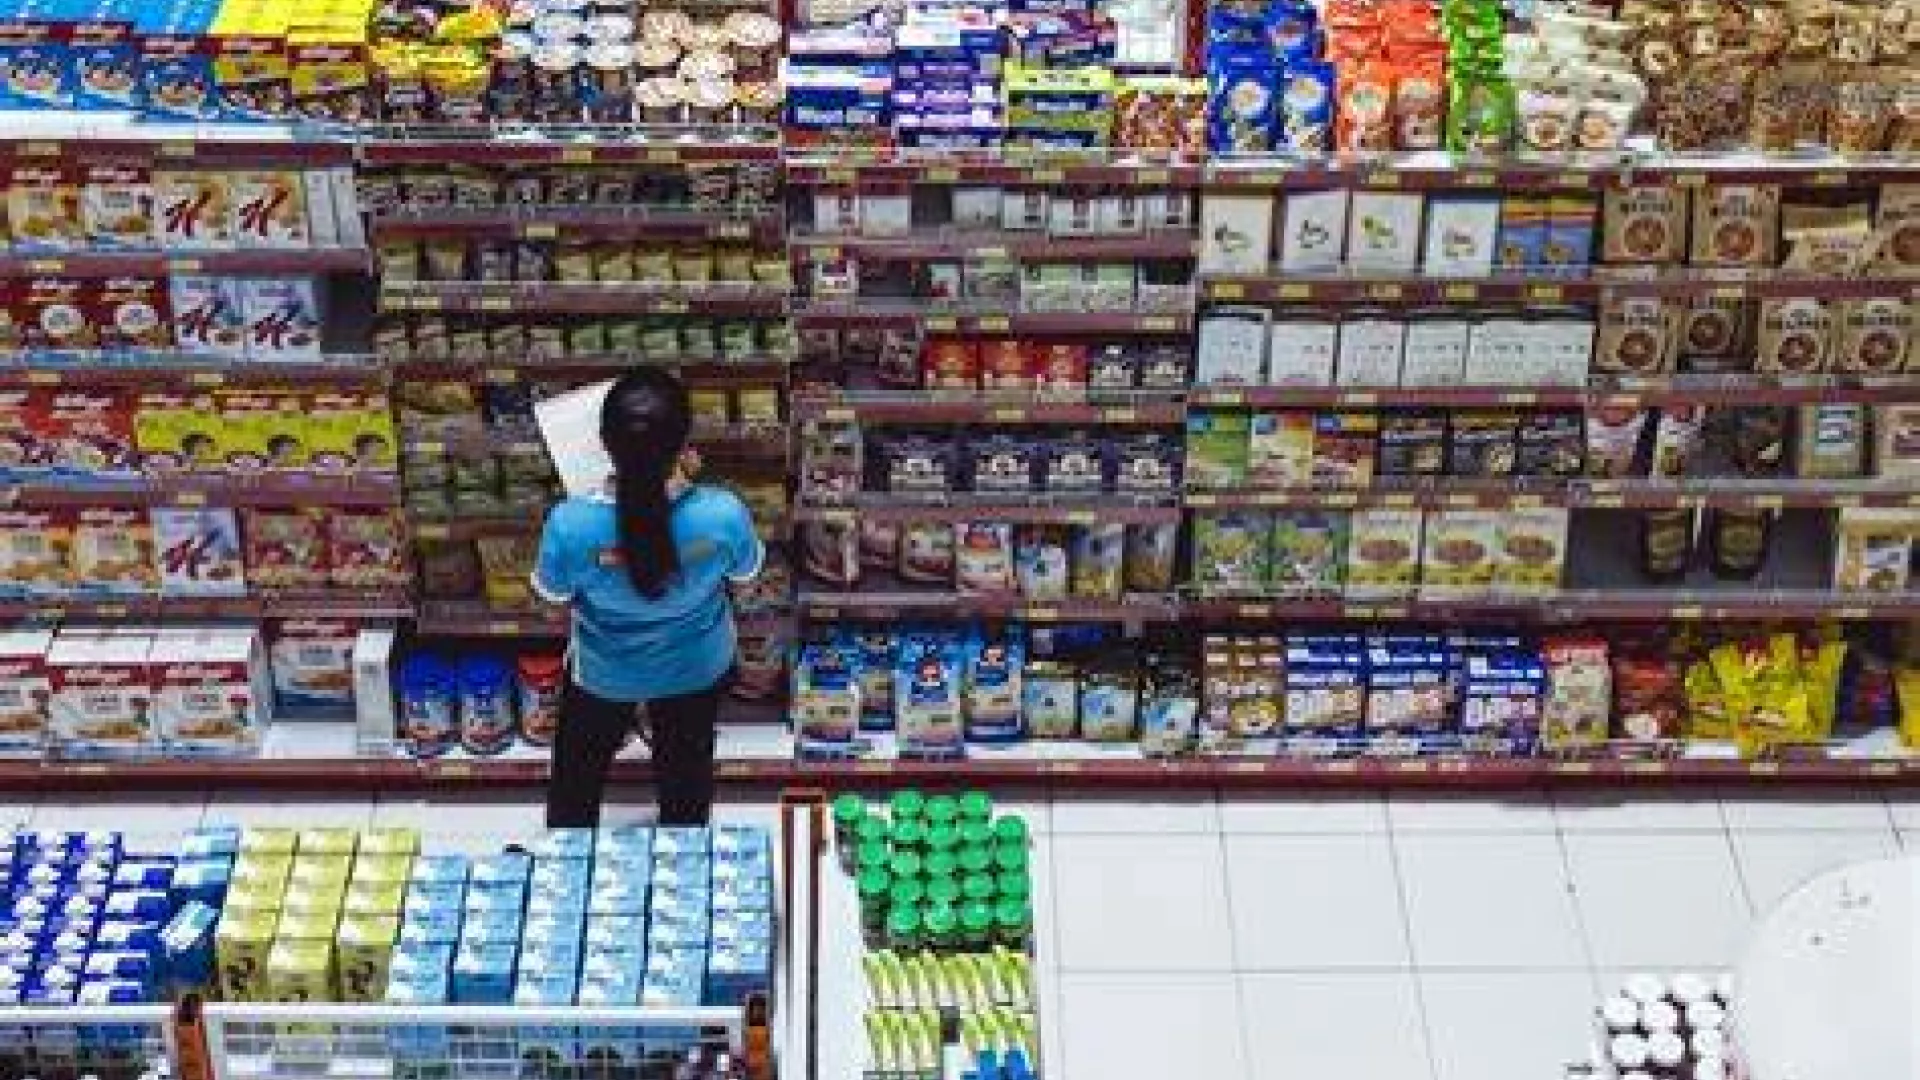 A photo of a person standing in front of grocery store shelves